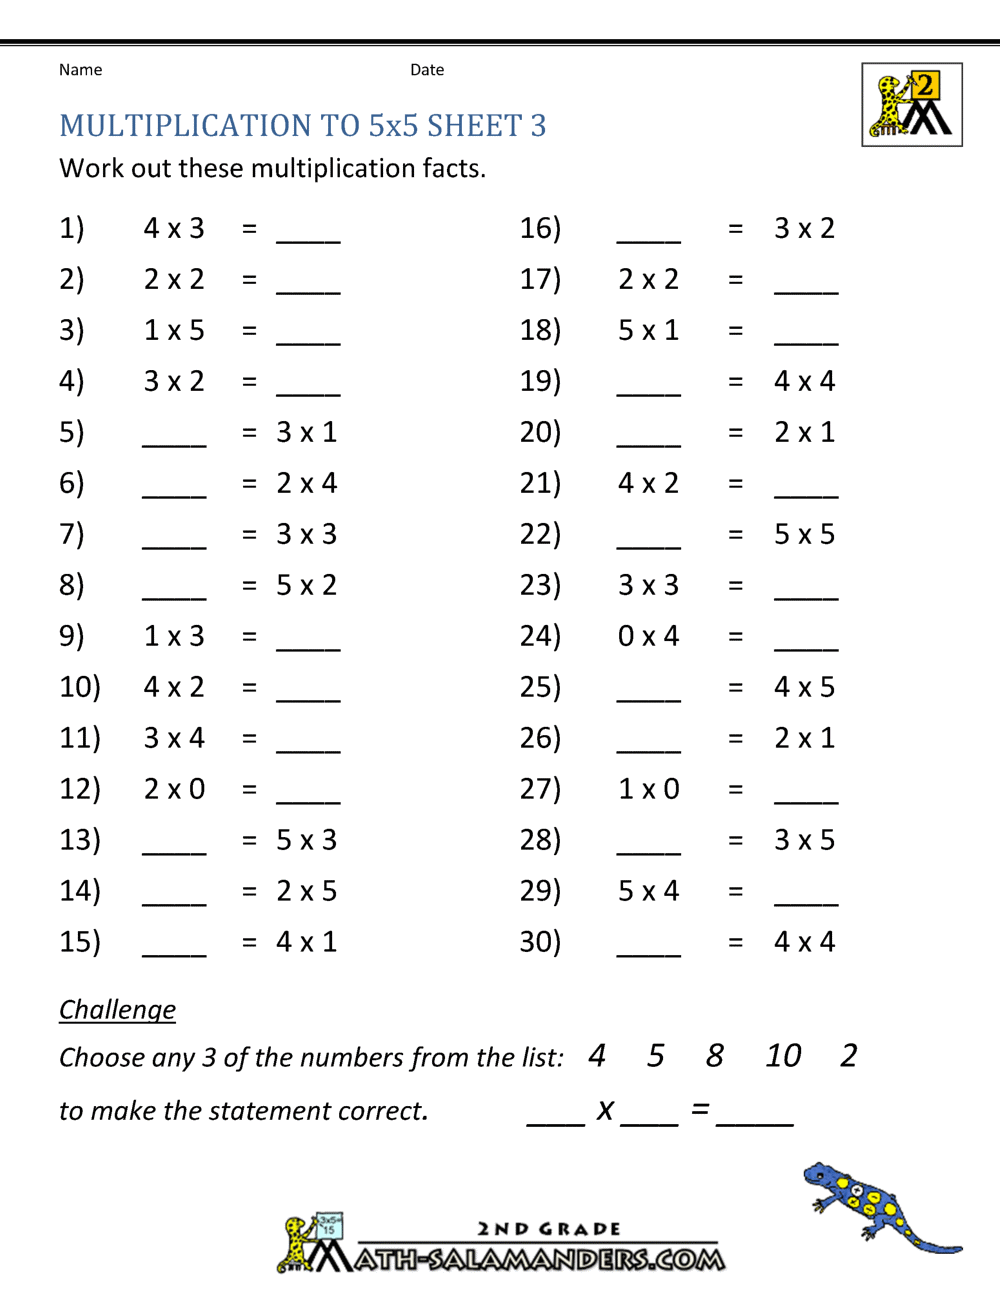 Multiplication Practice Worksheets to 5x5